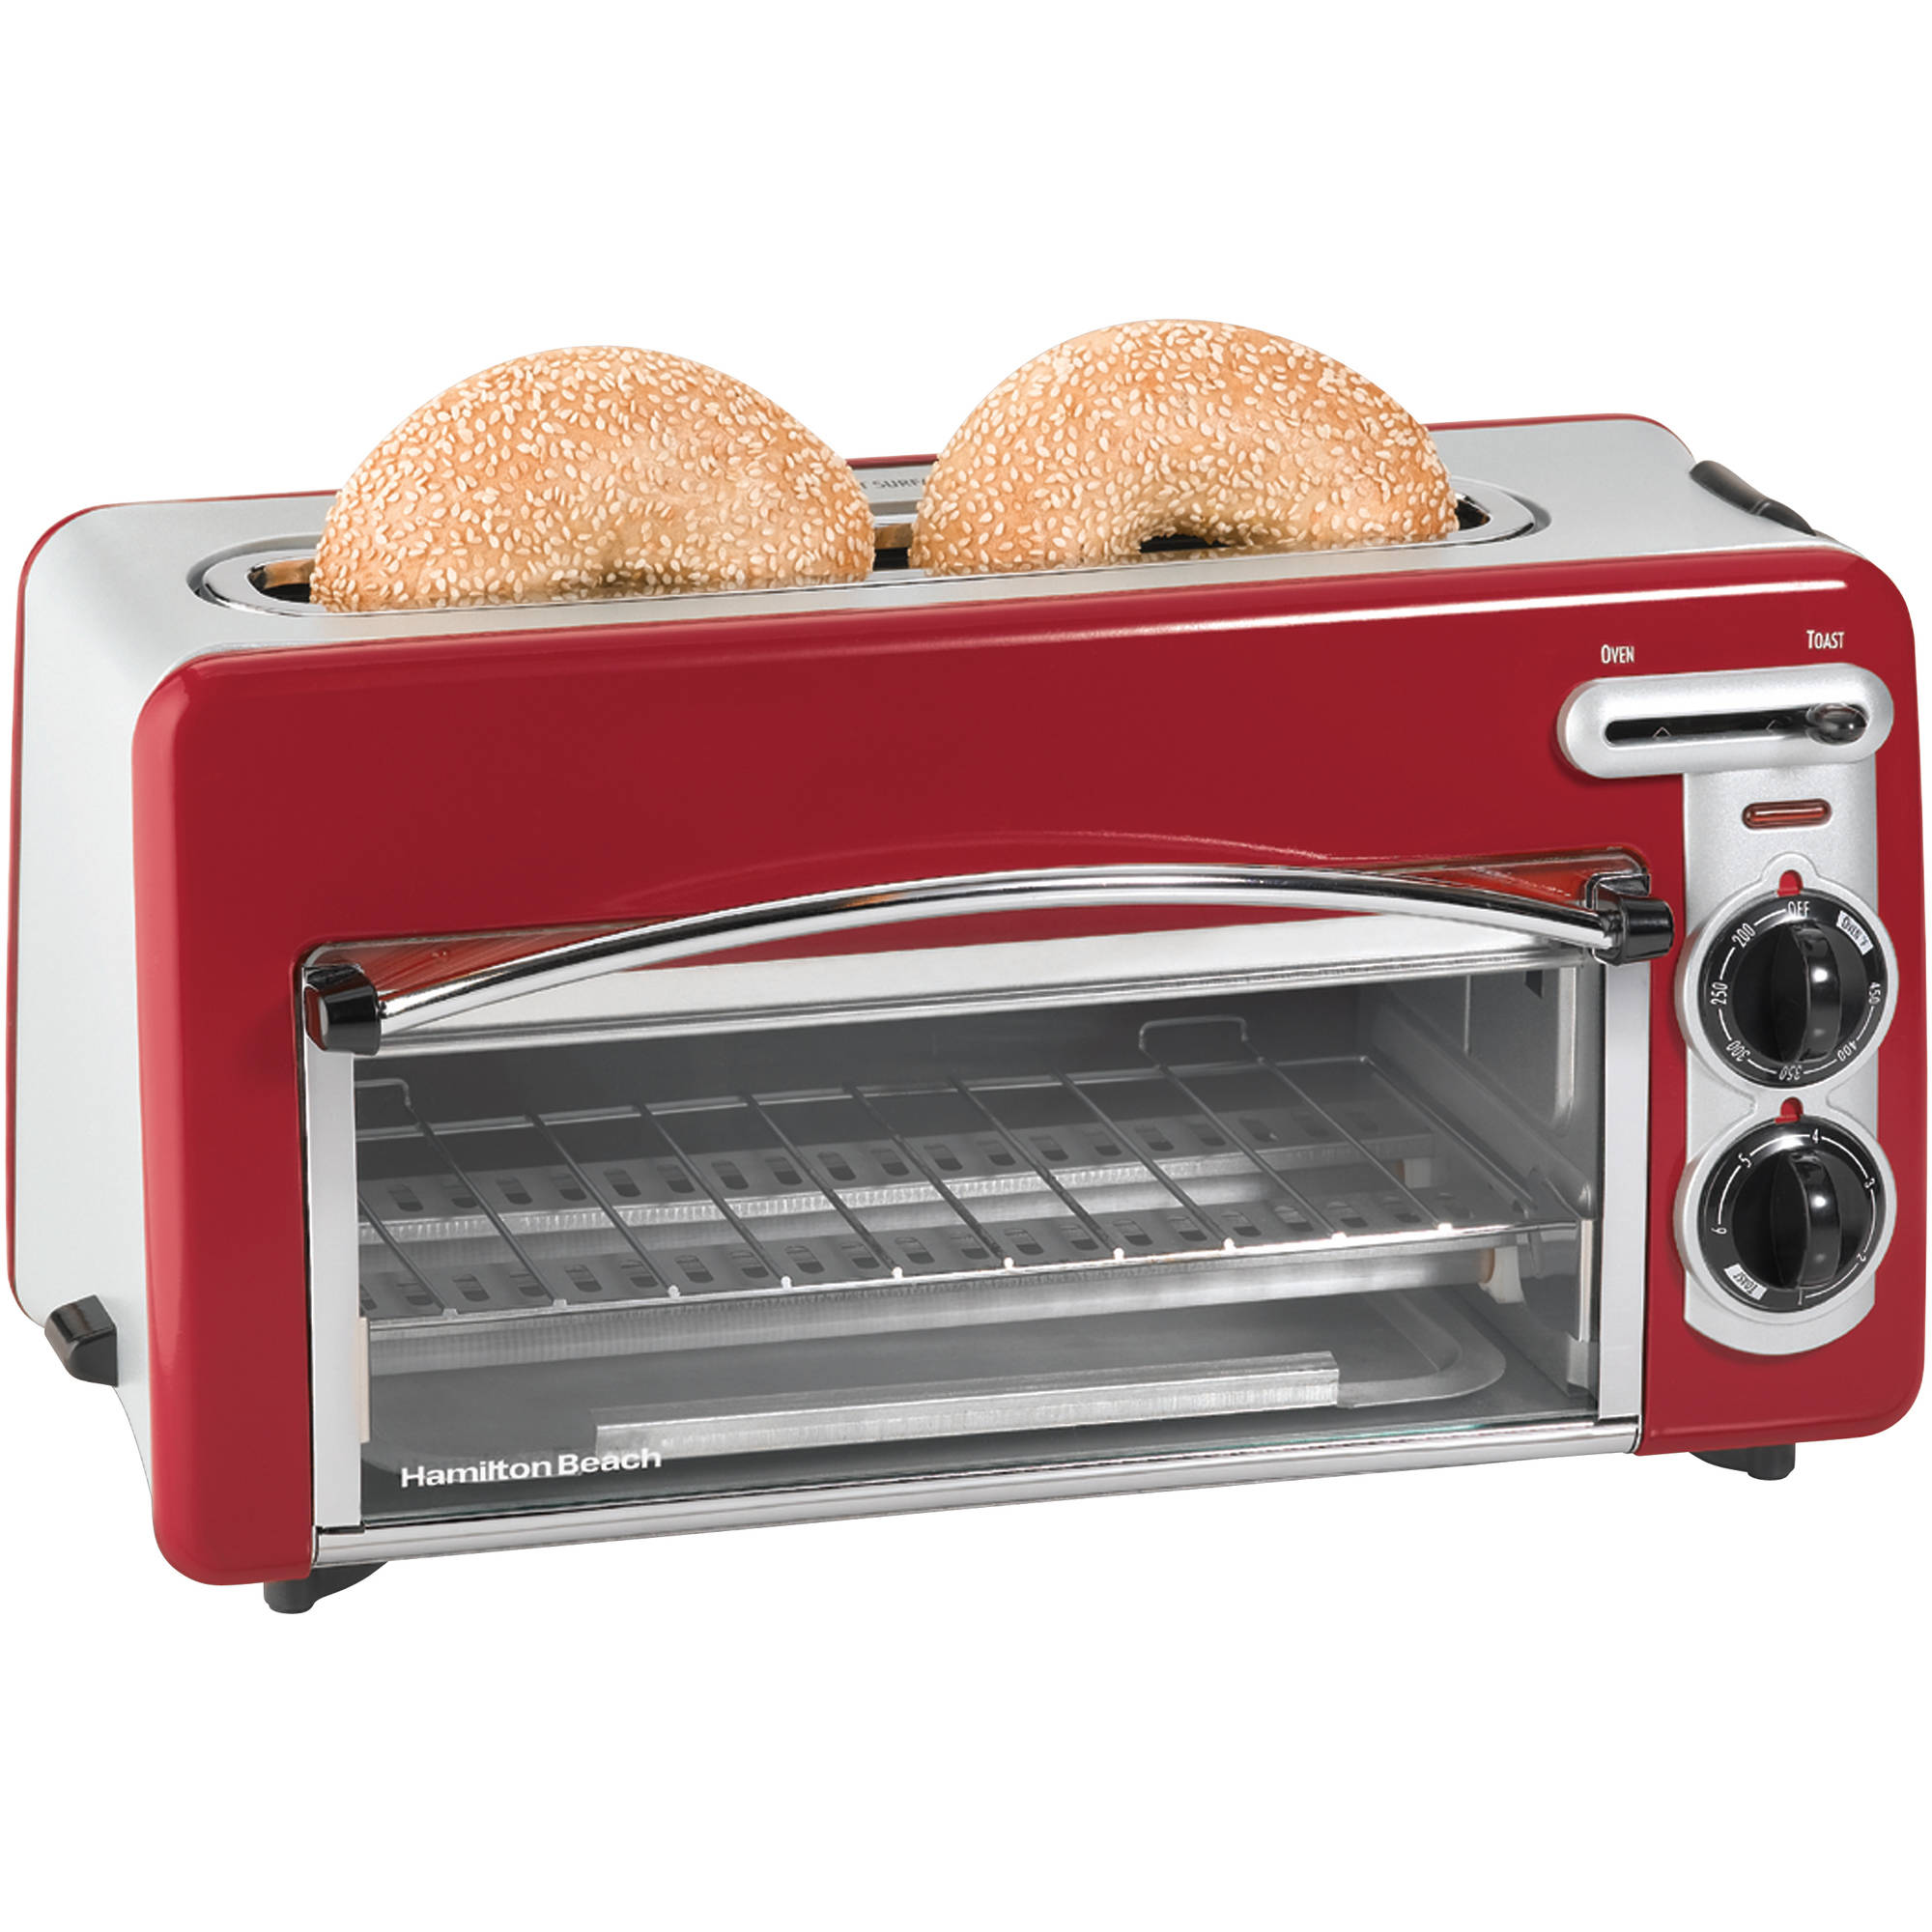 Hamilton Beach Toastation 2-in-1 2 Slice Toaster & Oven In Red | Model# 22703 - image 1 of 4